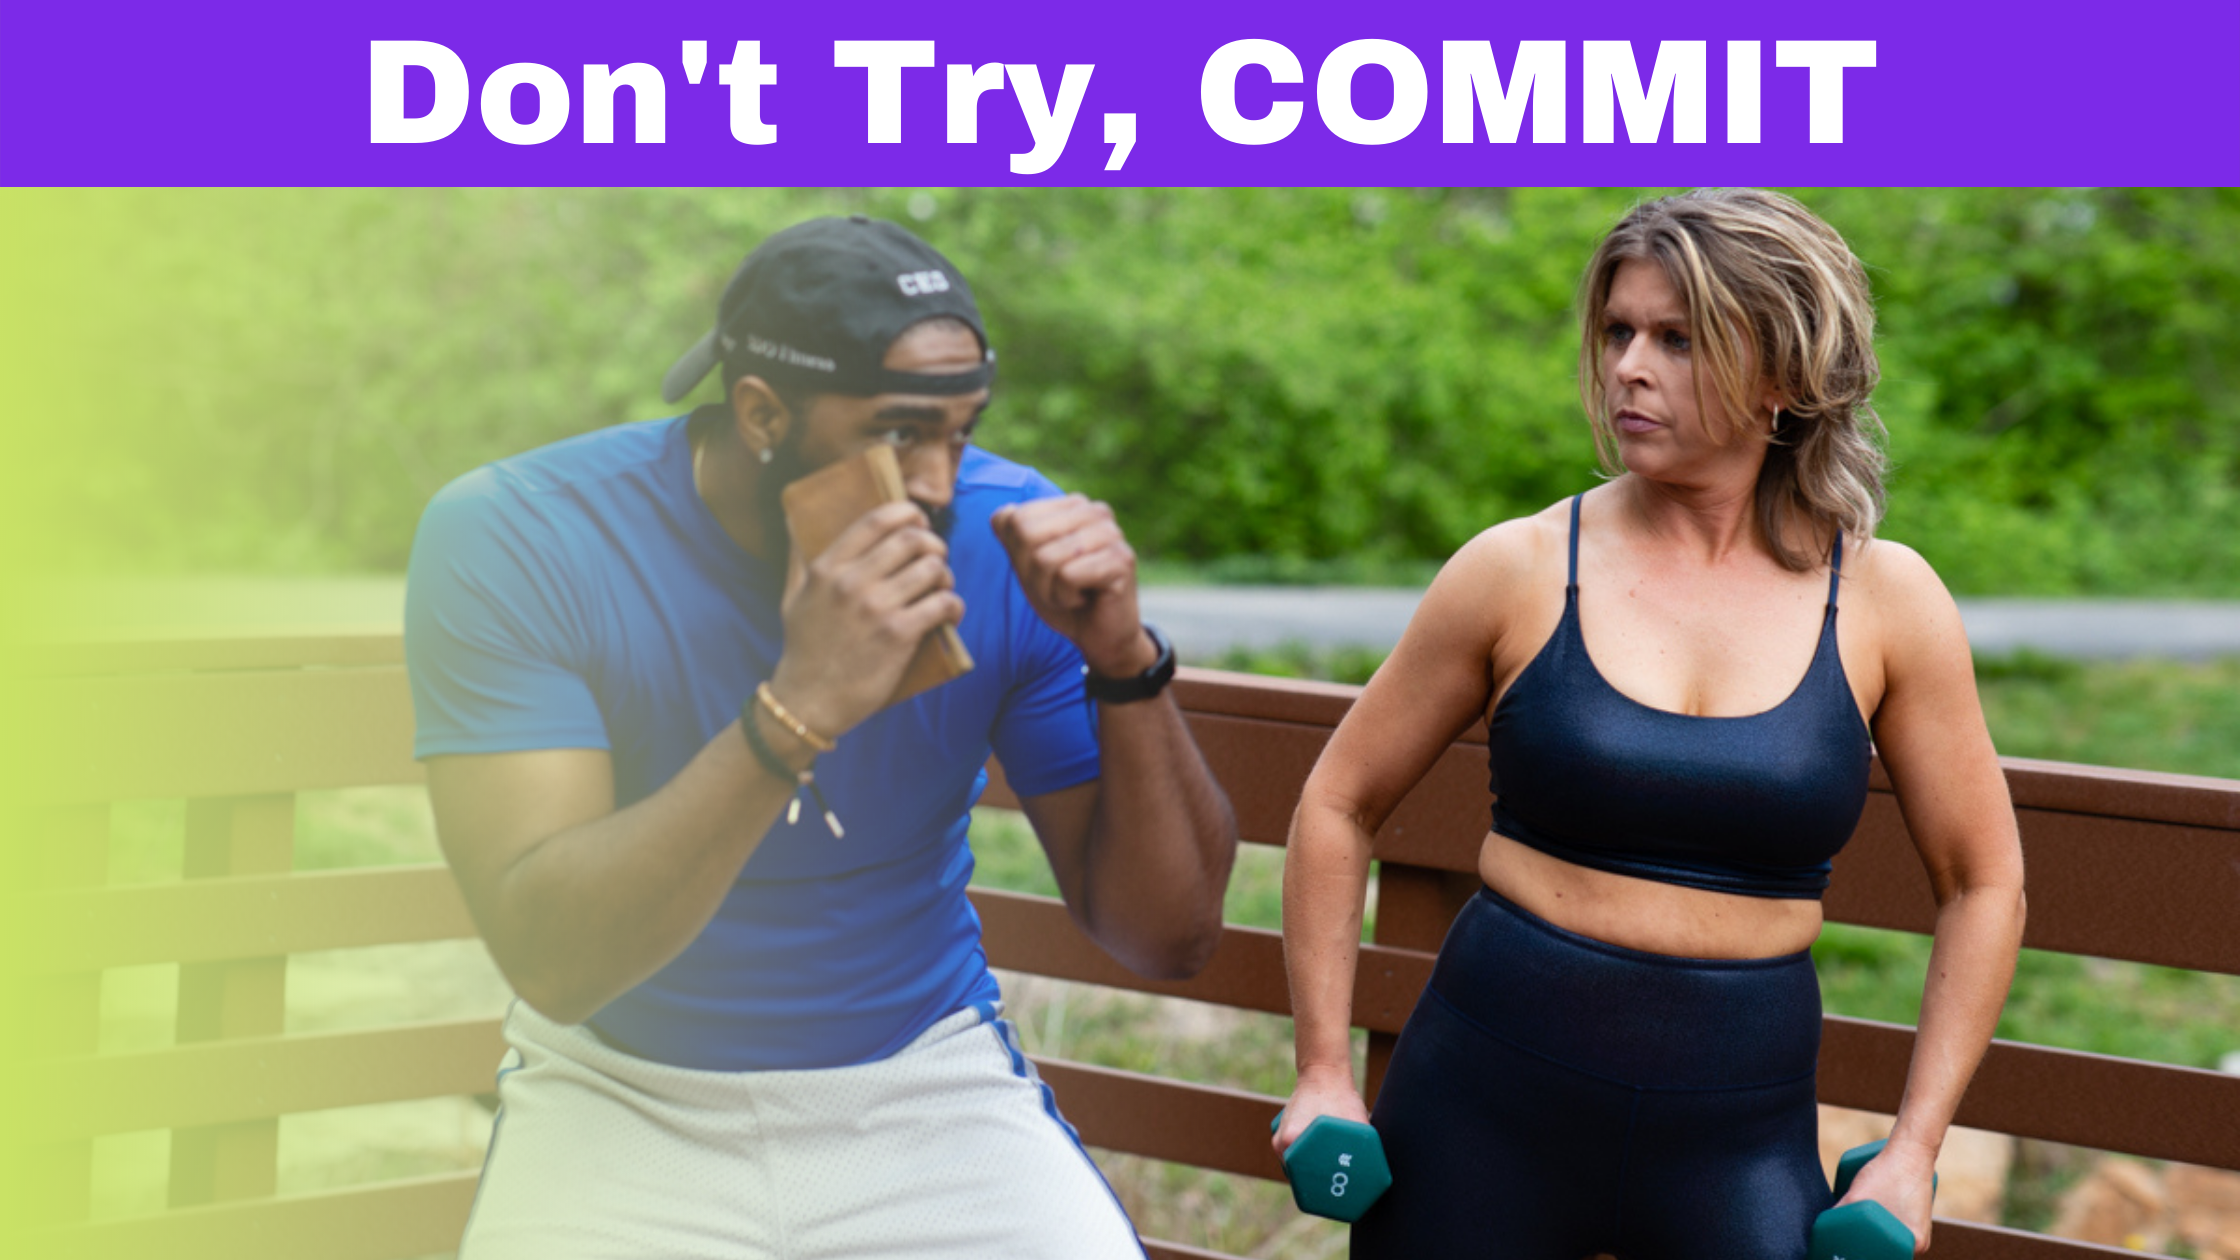 Commit To Your goals